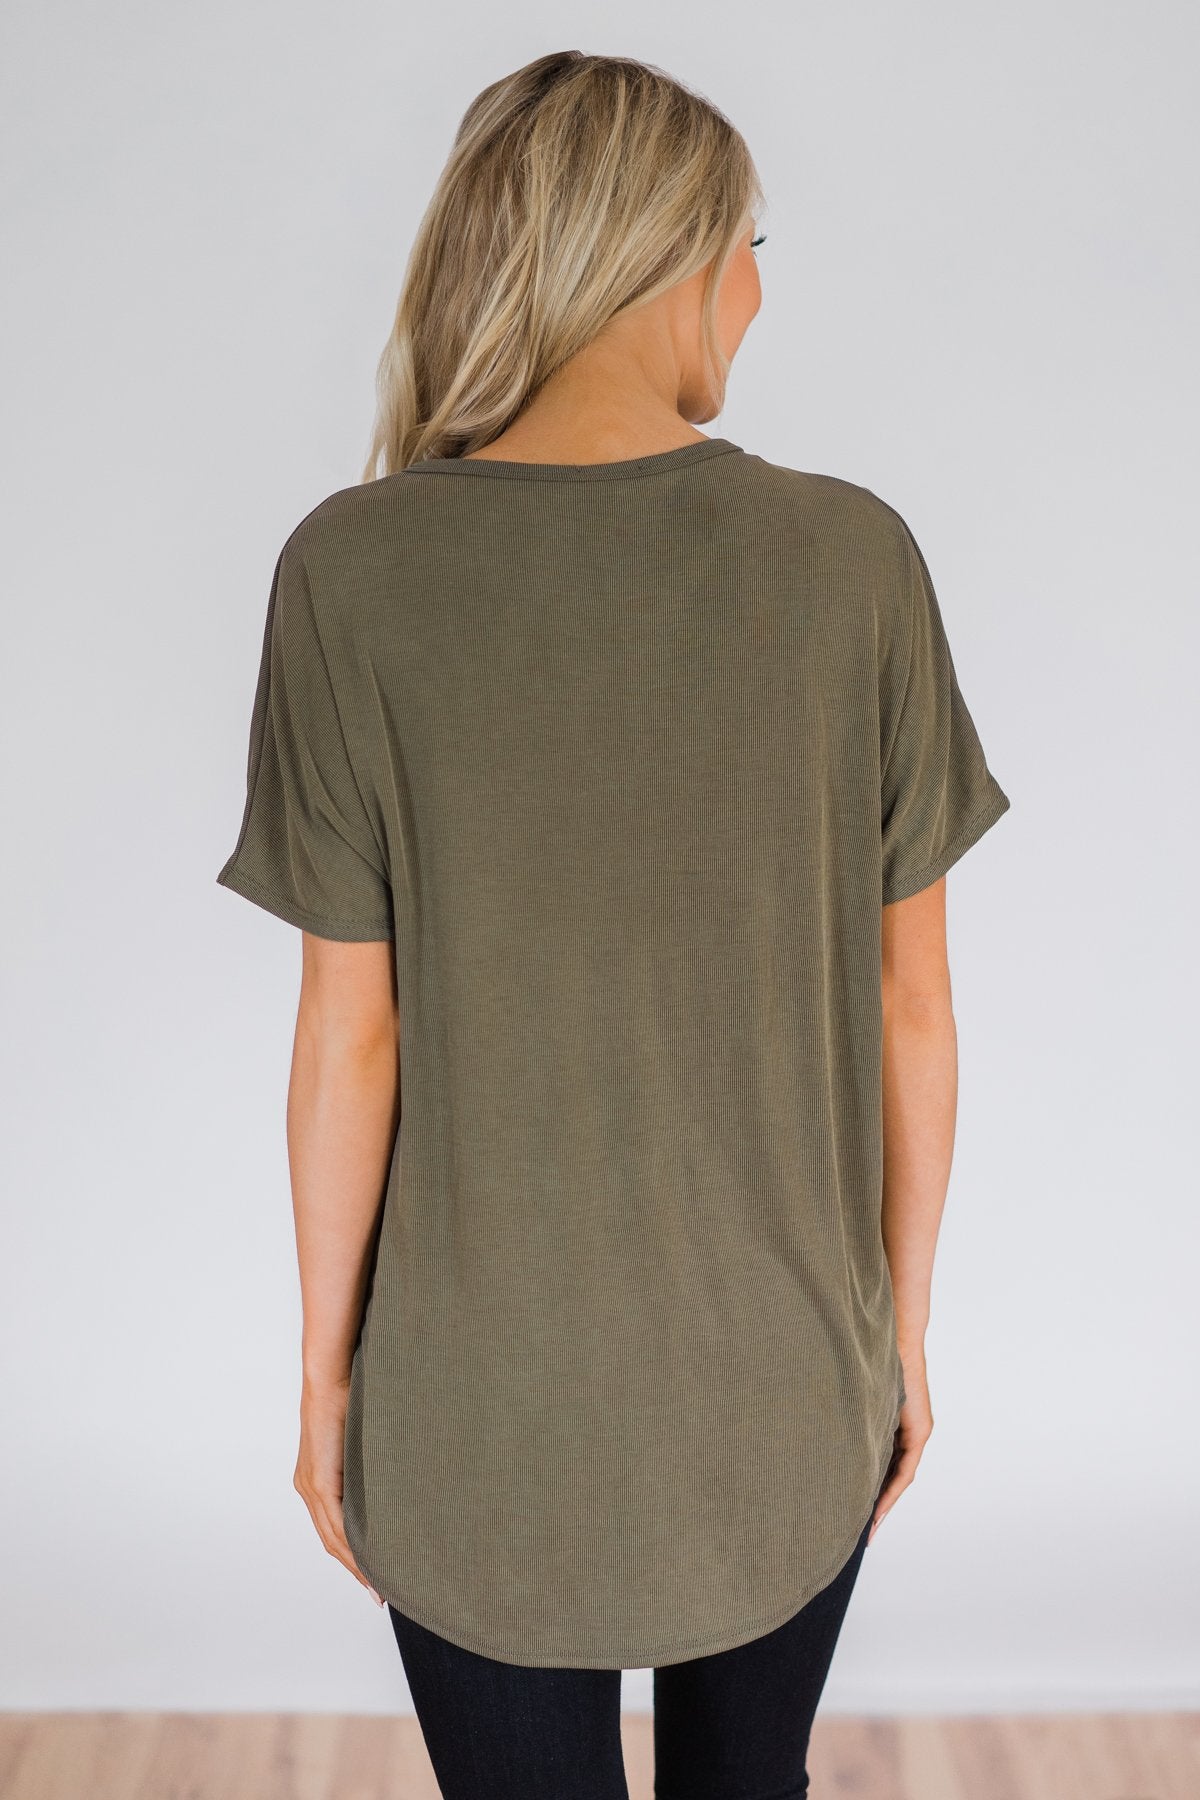 Coming Your Way Dolman Button Top- Olive